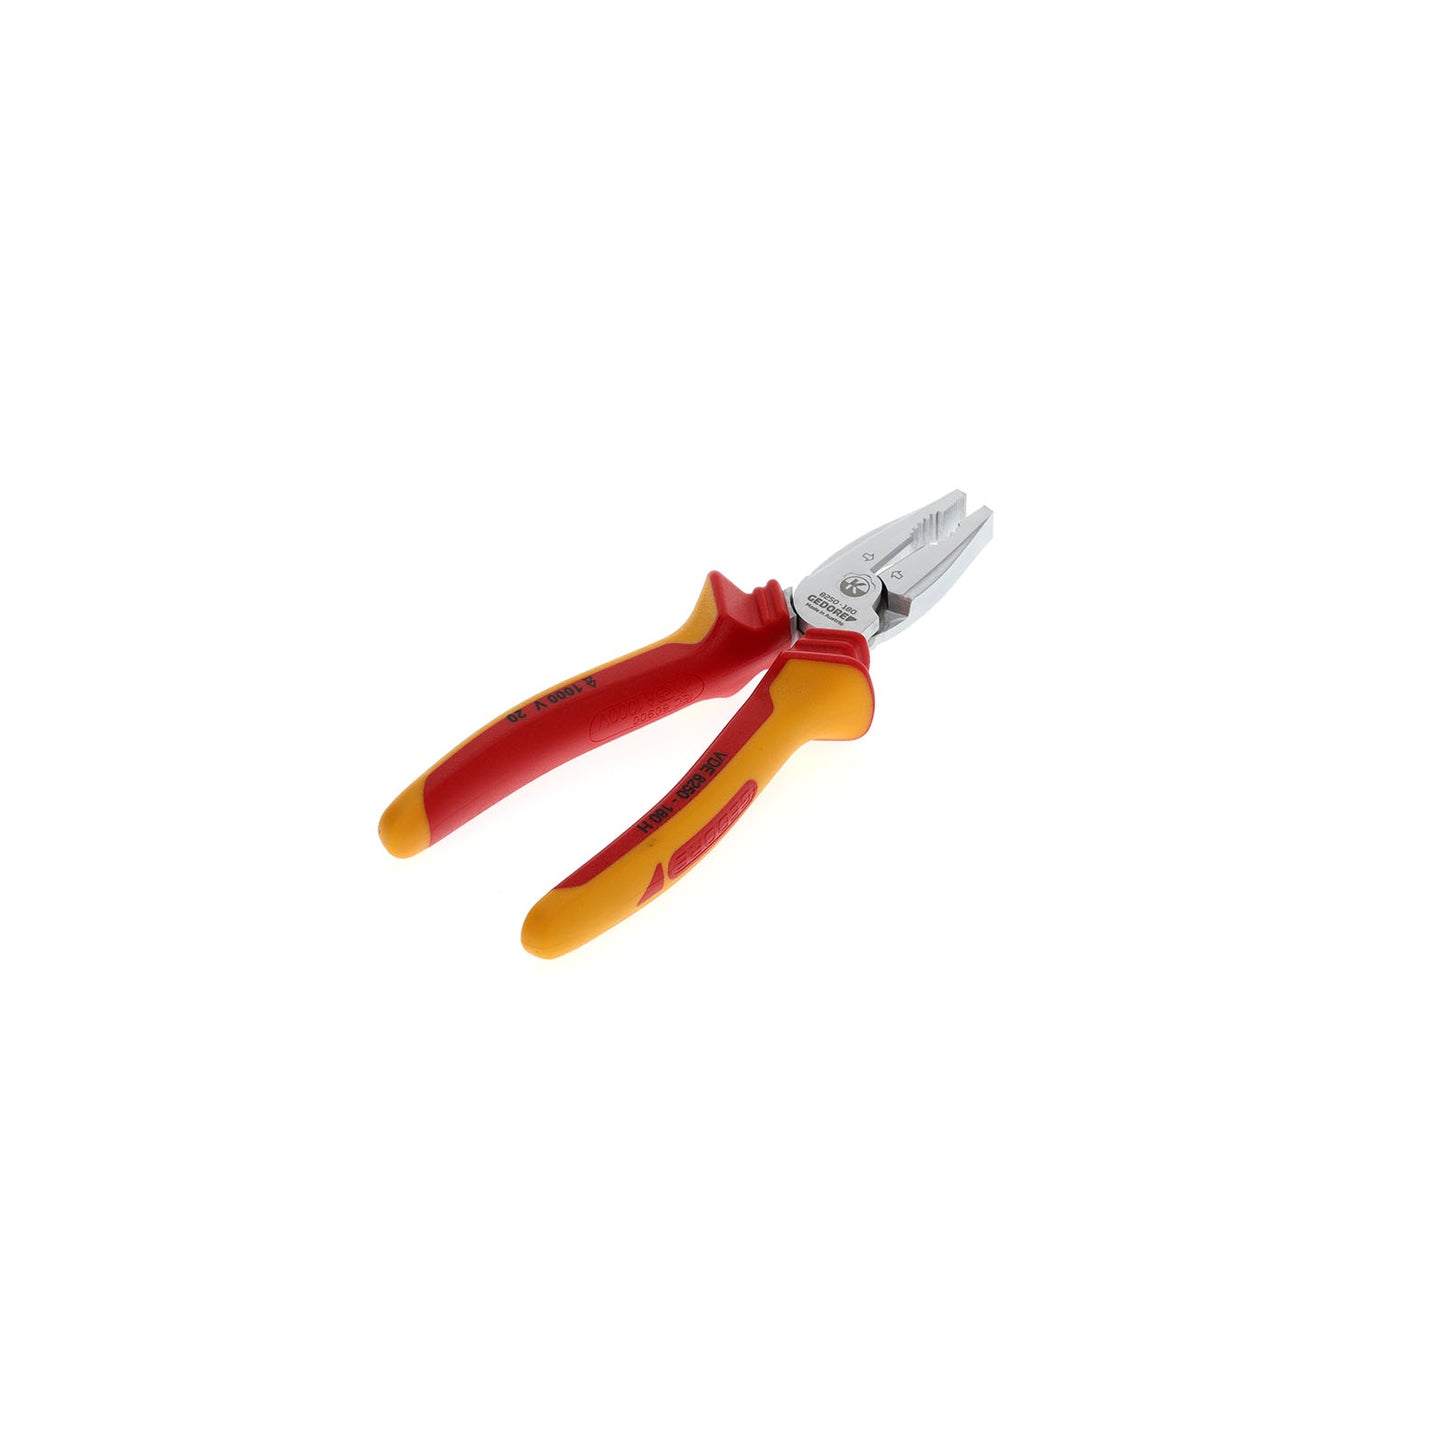 GEDORE VDE 8250-180 H - Universal Pliers VDE 180 H (1550950)